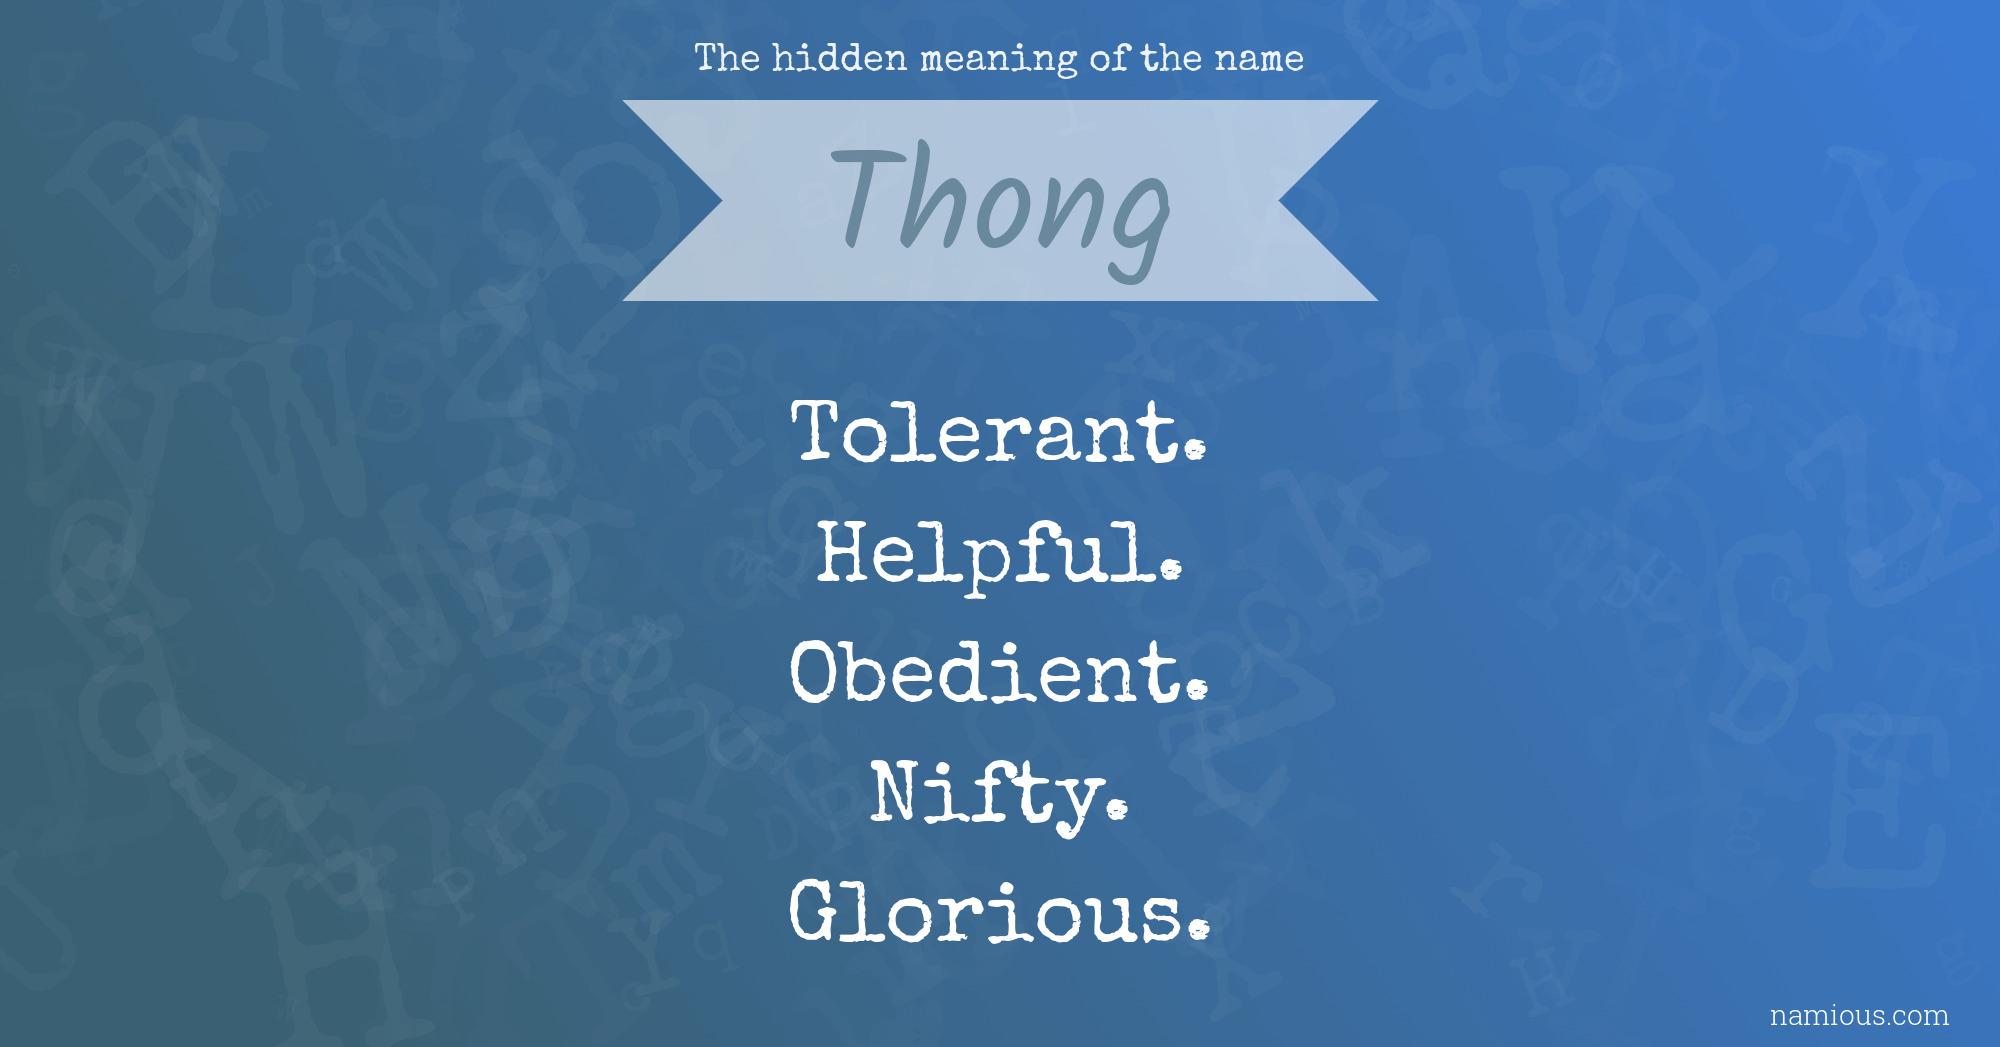 The hidden meaning of the name Thong